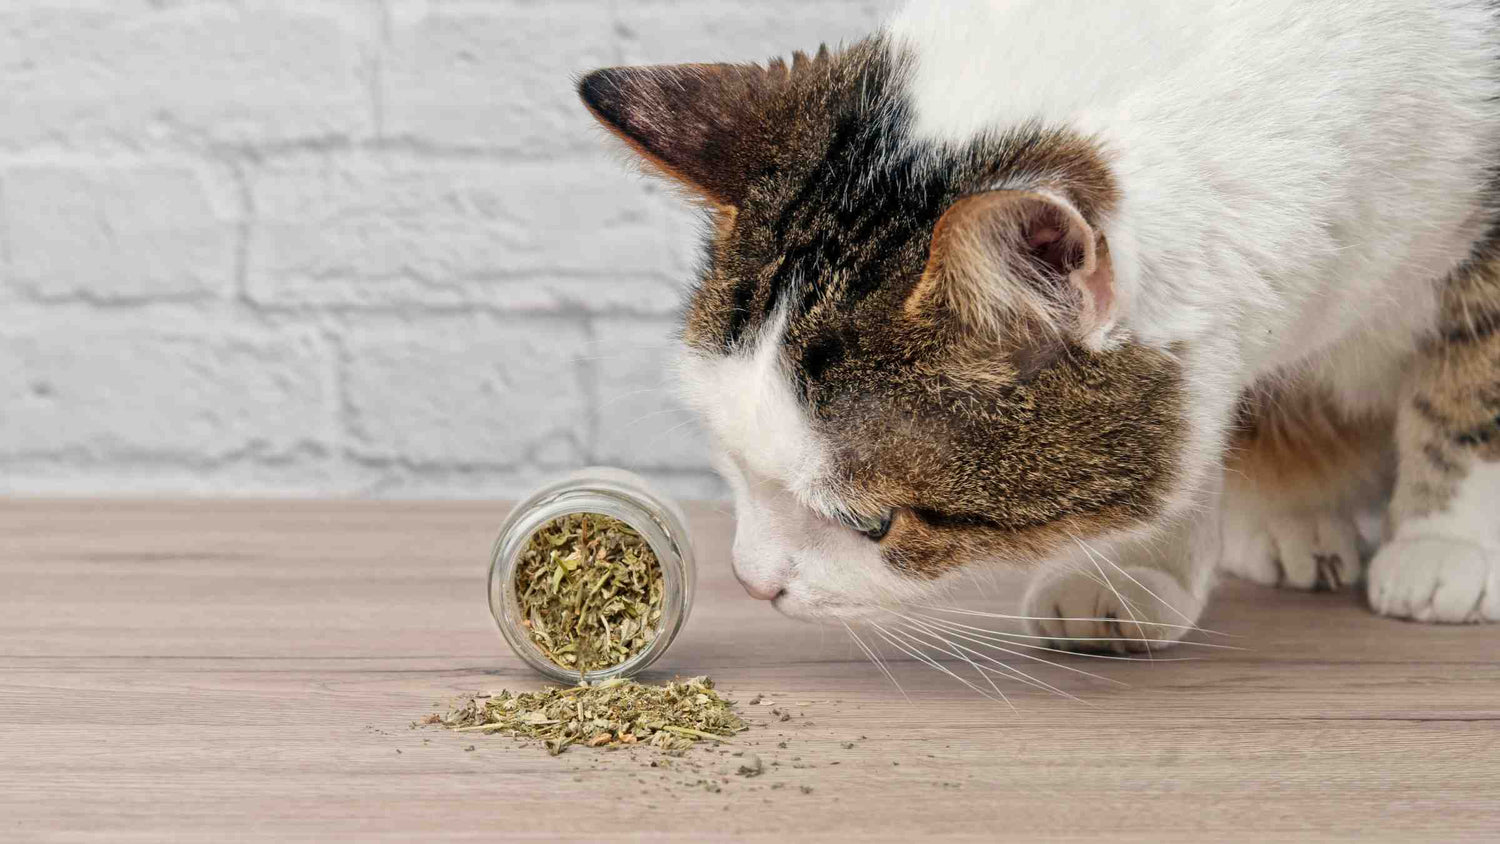 Discover the joys and benefits of natural remedies with this image of an inquisitive tabby cat sniffing dried catnip, promoting a healthy and stimulating environment for your feline friend.